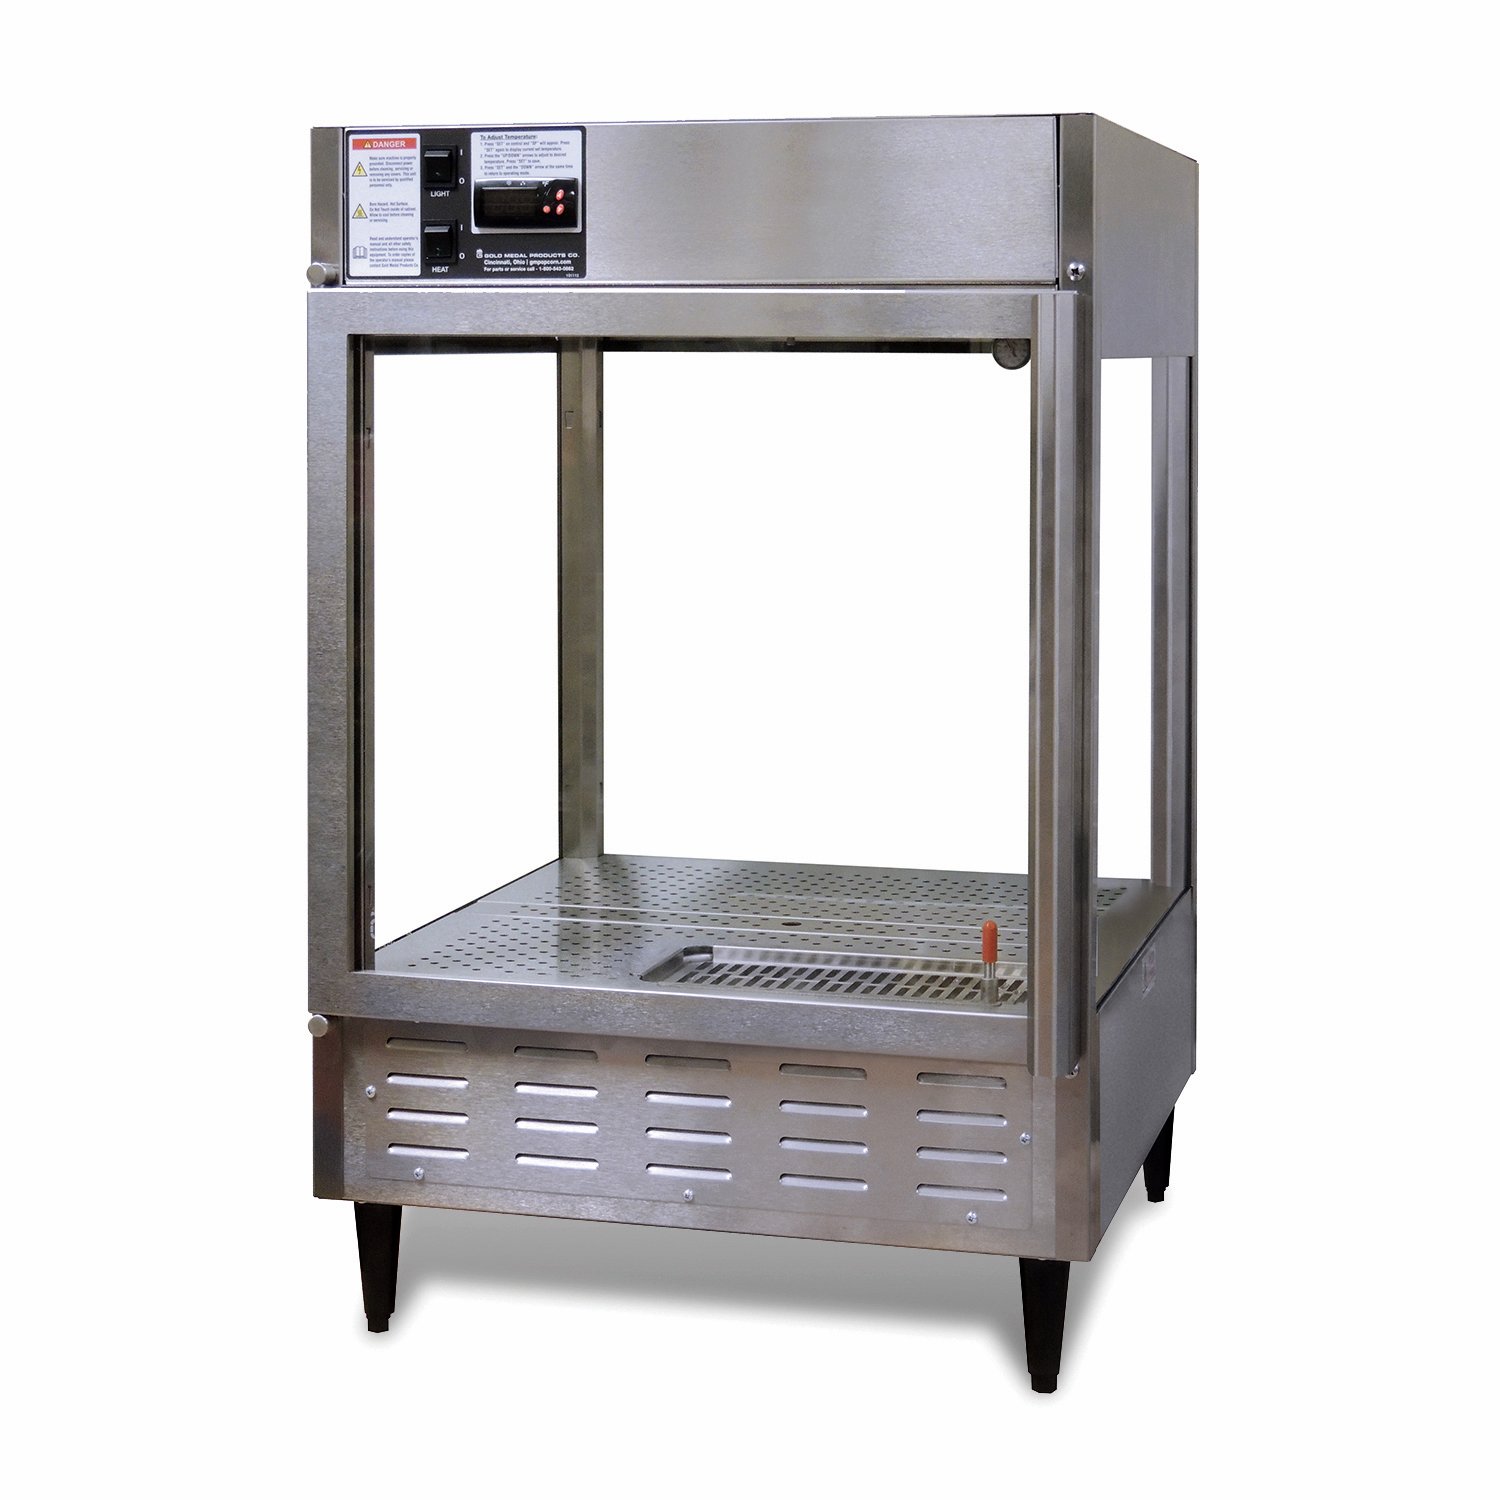 GOLD MEDAL LARGE HUMIDIFIED WARMING CABINET MODEL: 5550-00 - Allen Associates